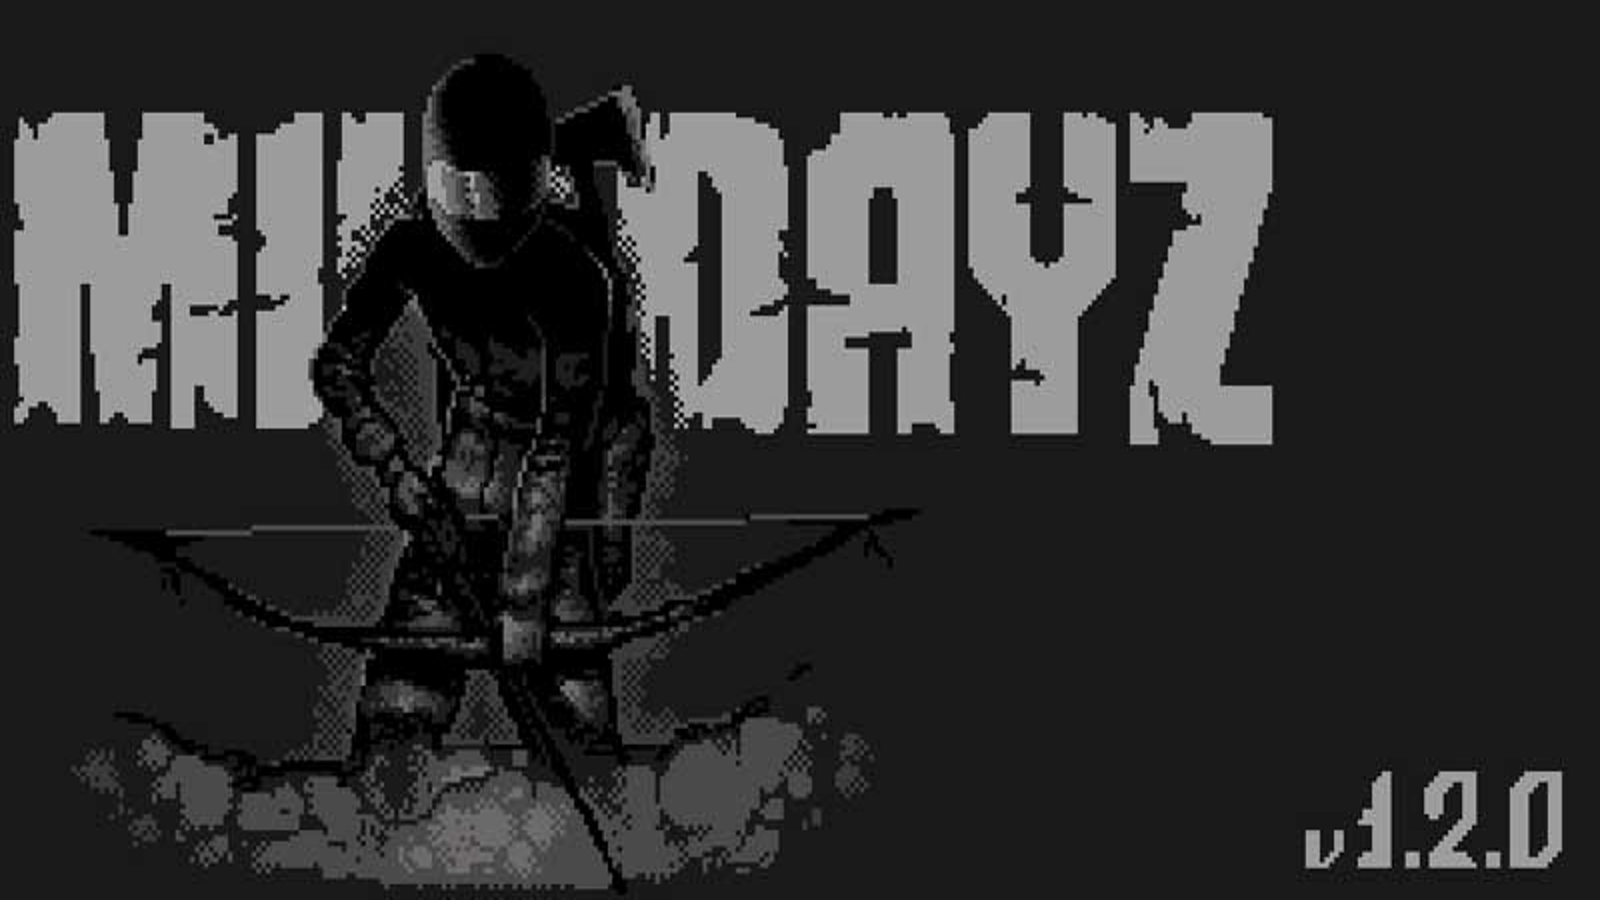 Trailer] Latest 'DayZ' Update Adds More Weapons, Quality of Life